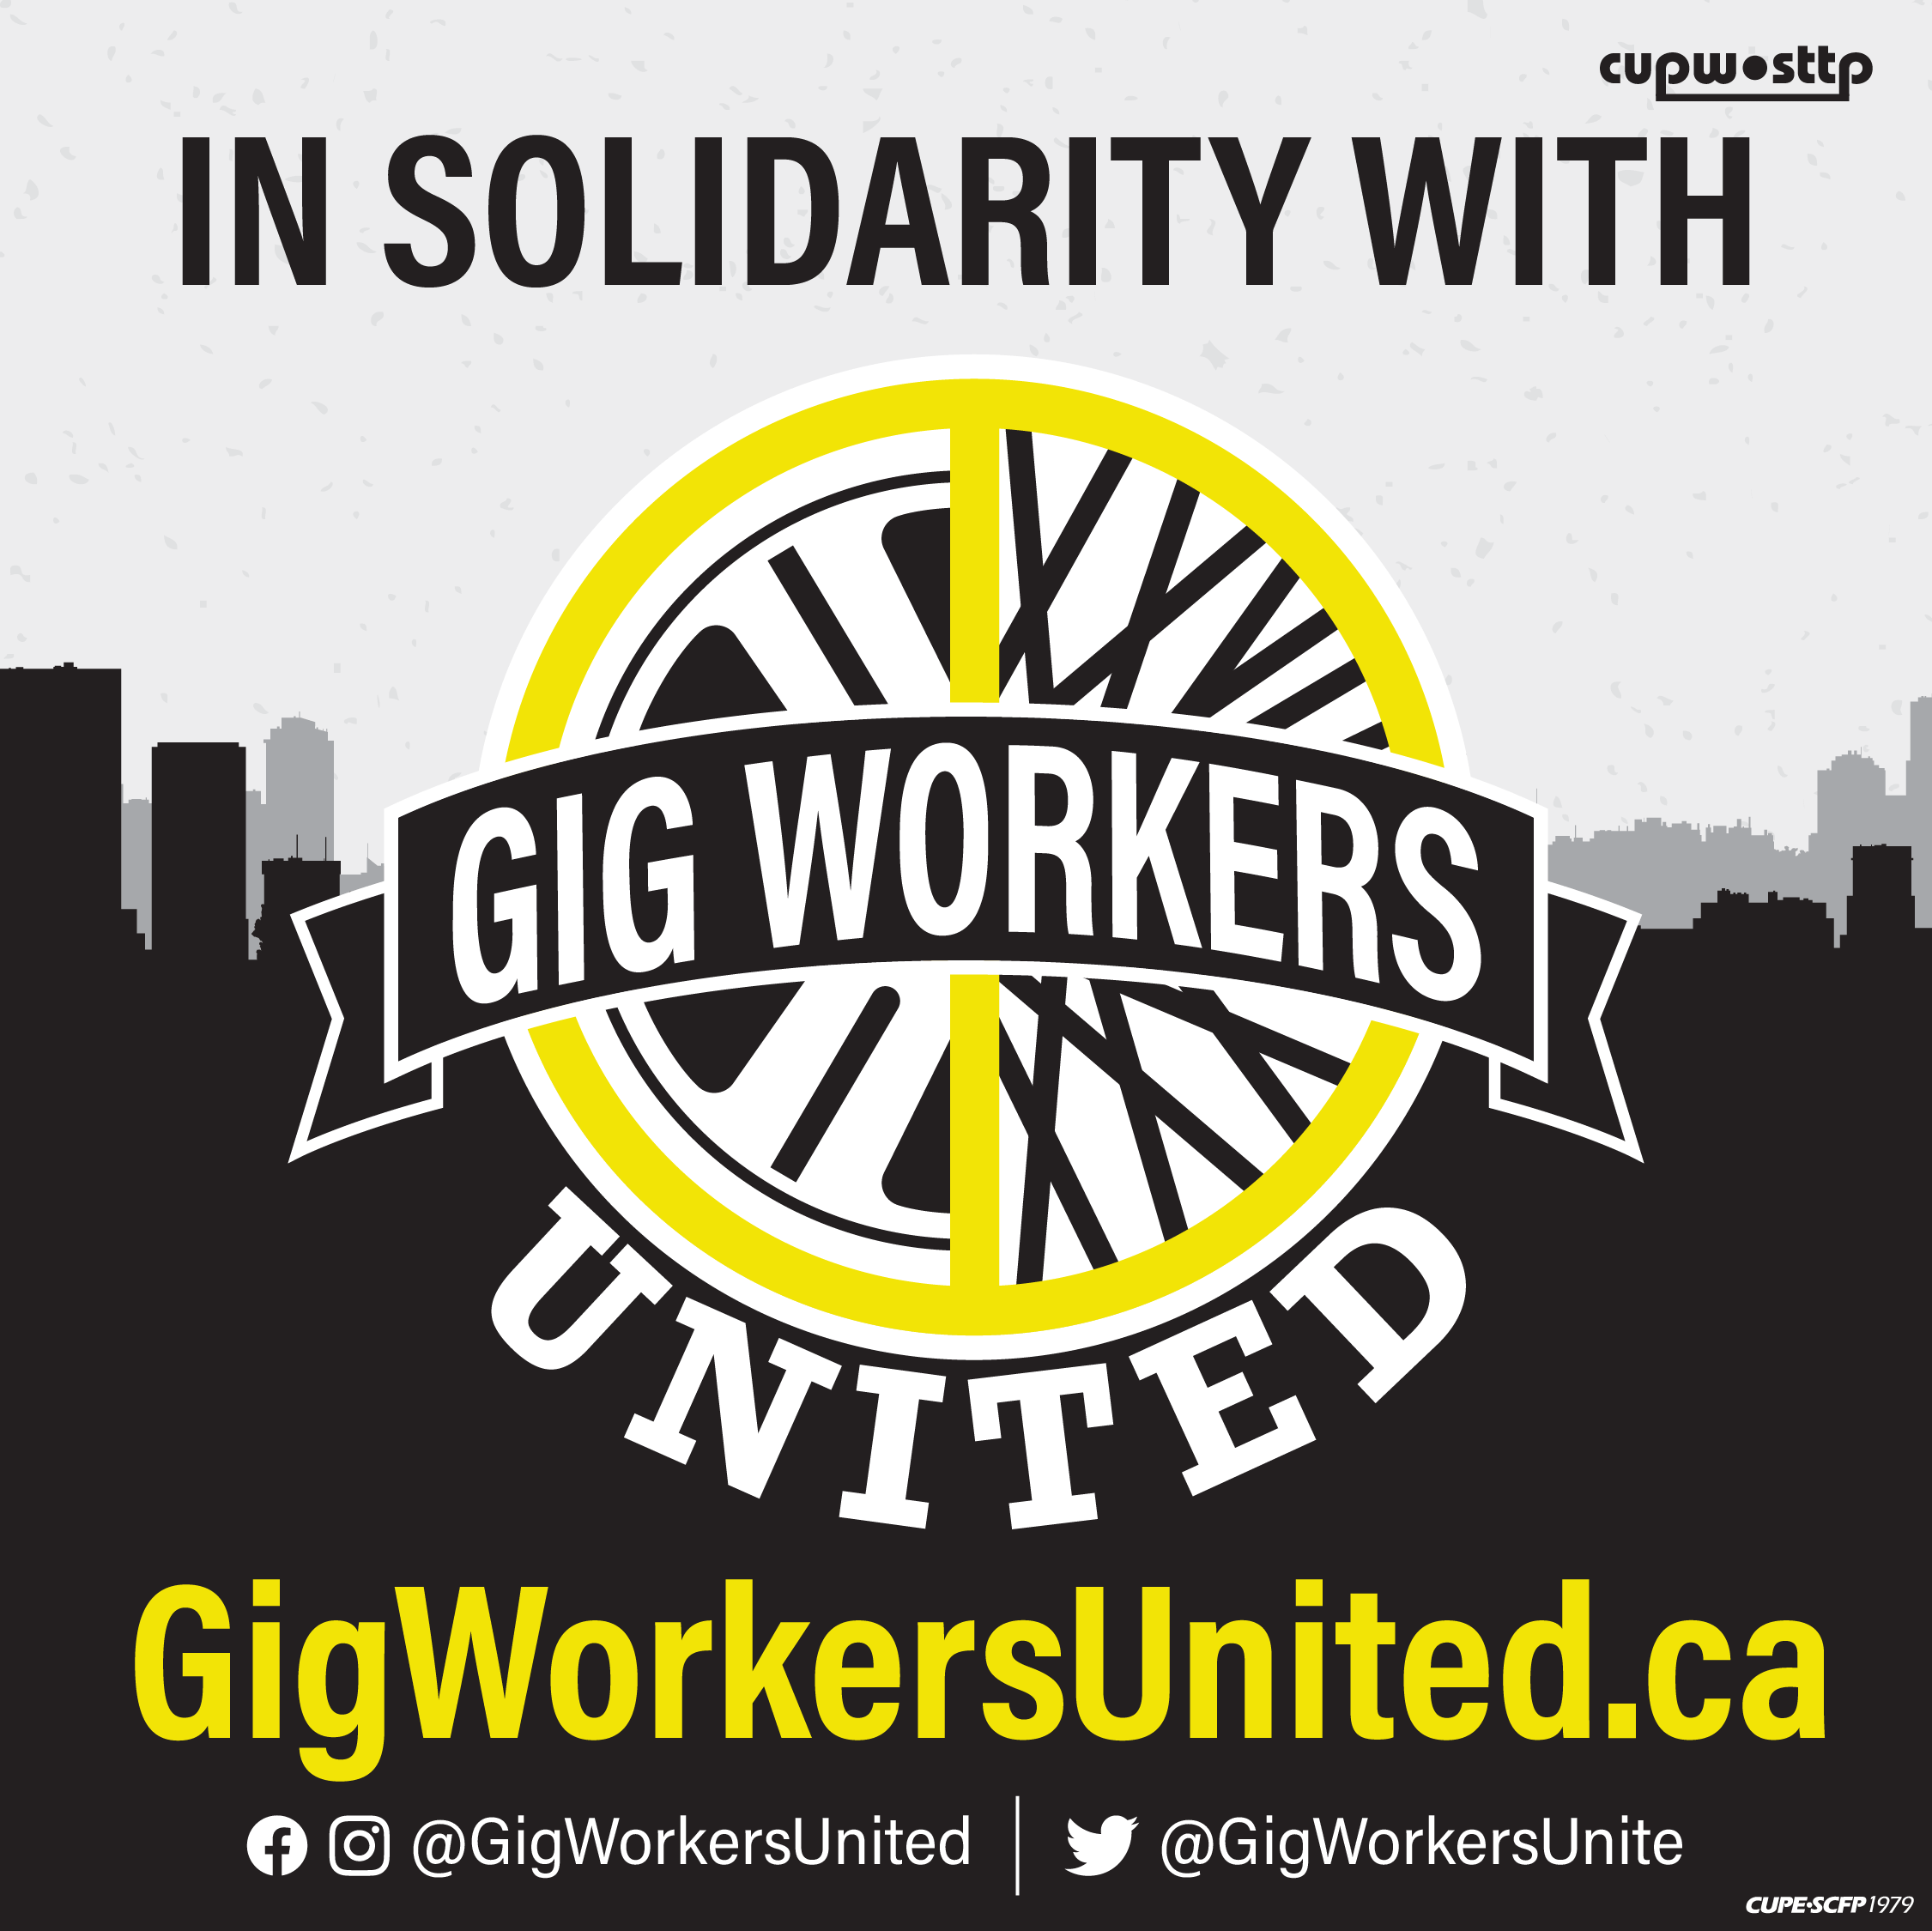 In solidarity with Gig Workers United